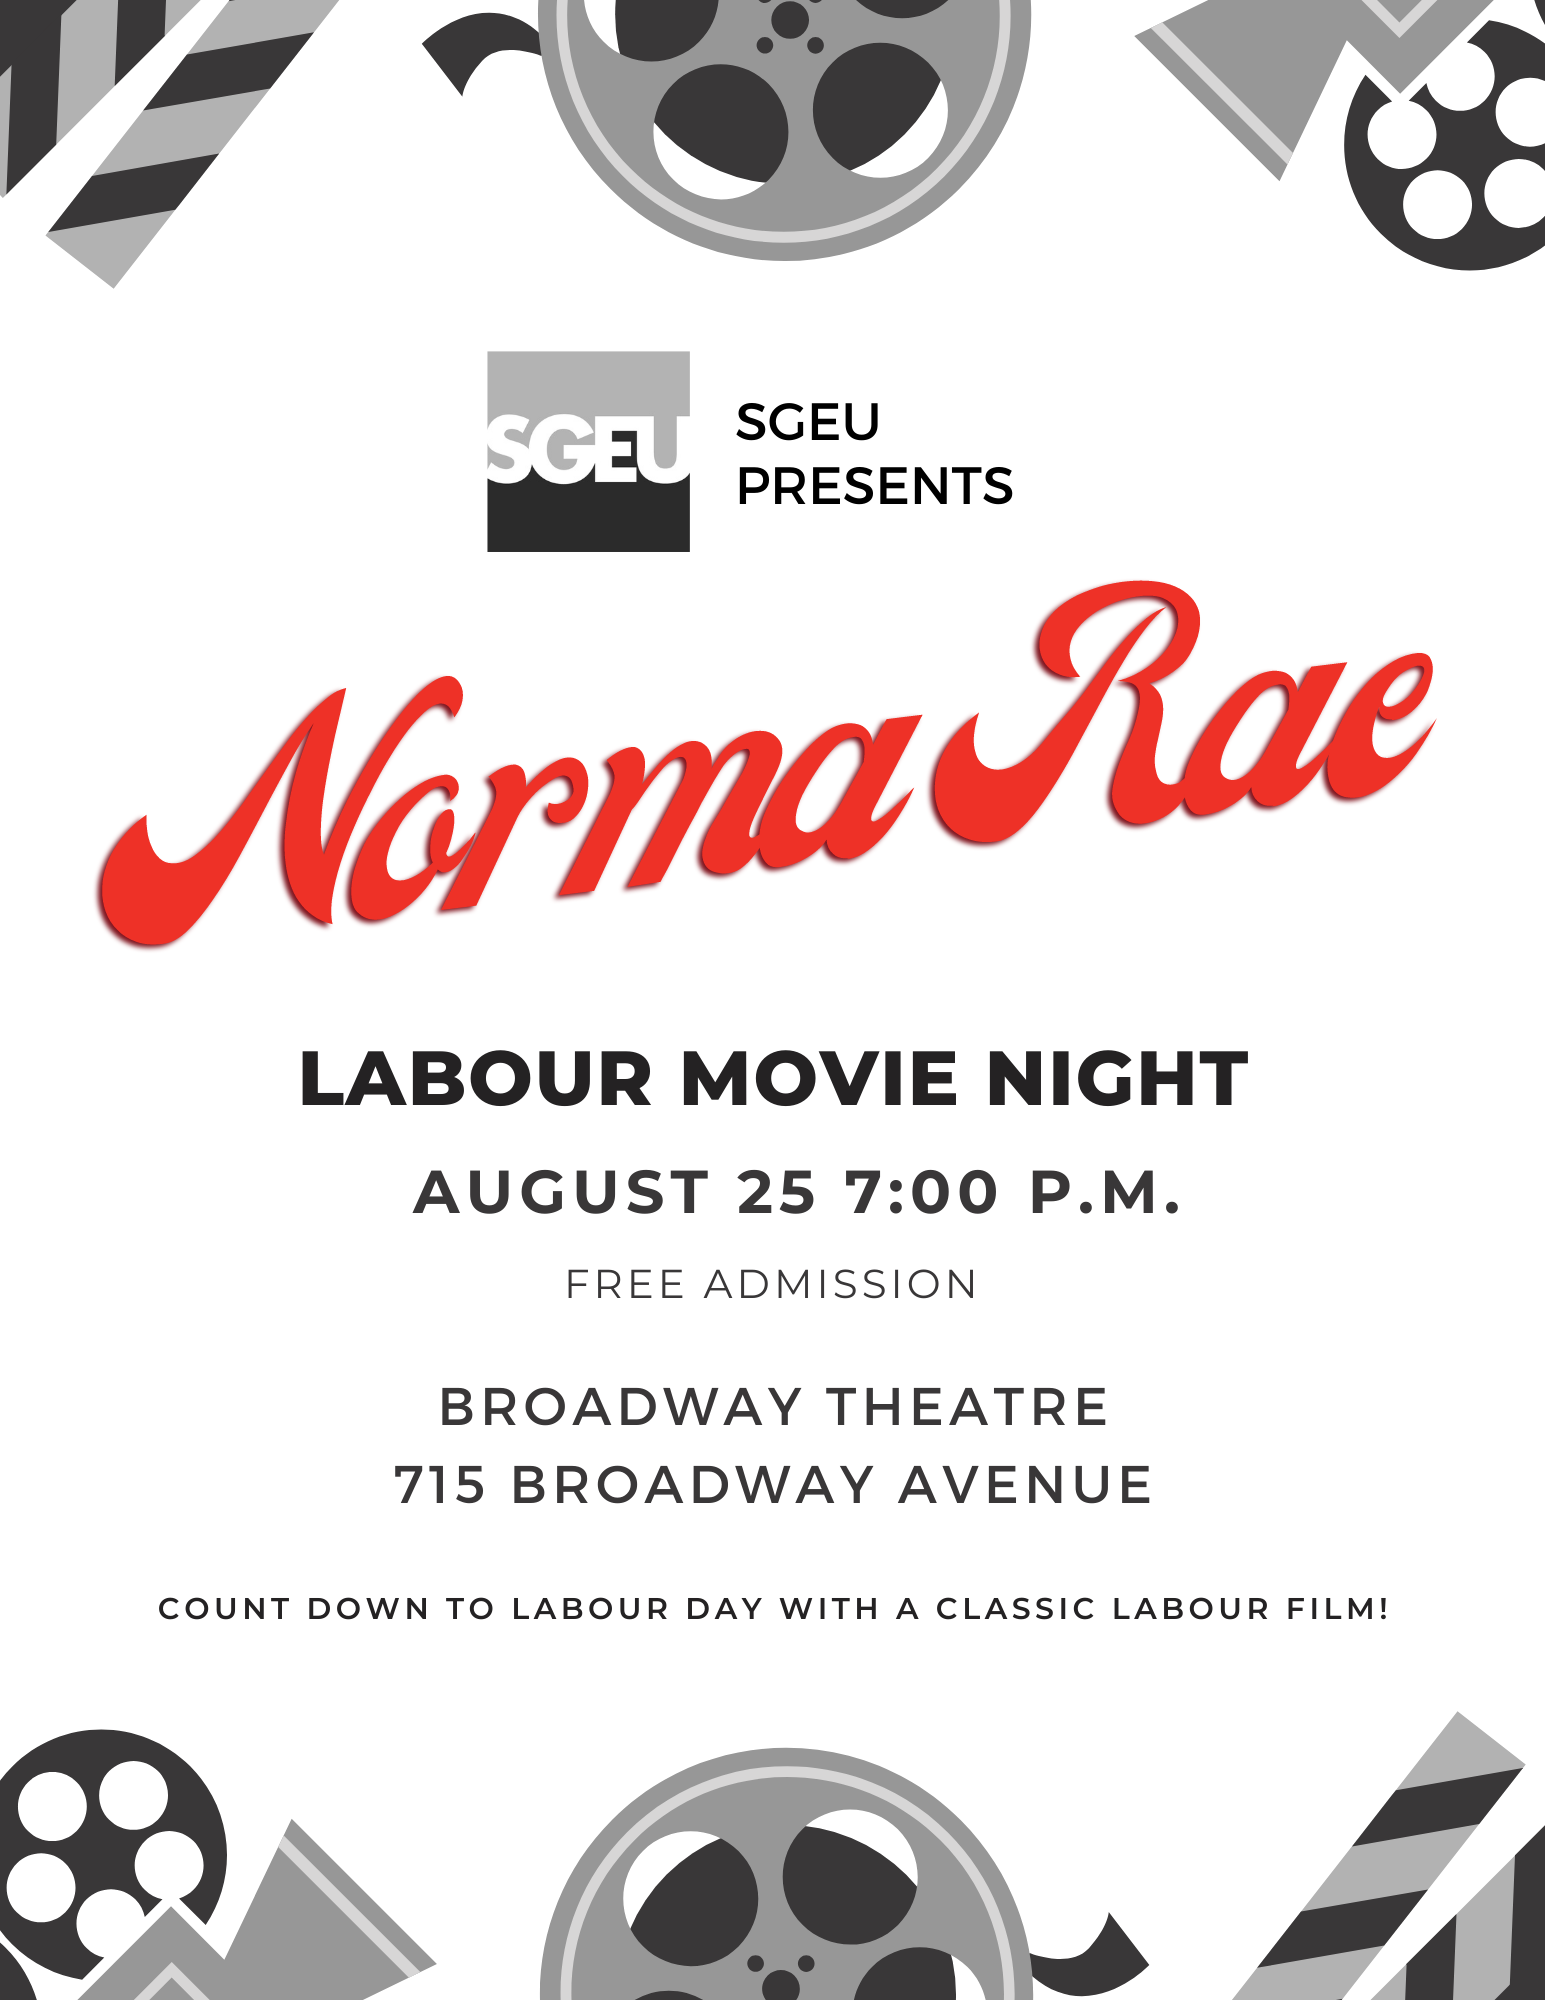 A poster advertising a viewing of the movie Norma Rae on Aug 25 at 7 pm at the Broadway Theatre in Saskatoon.